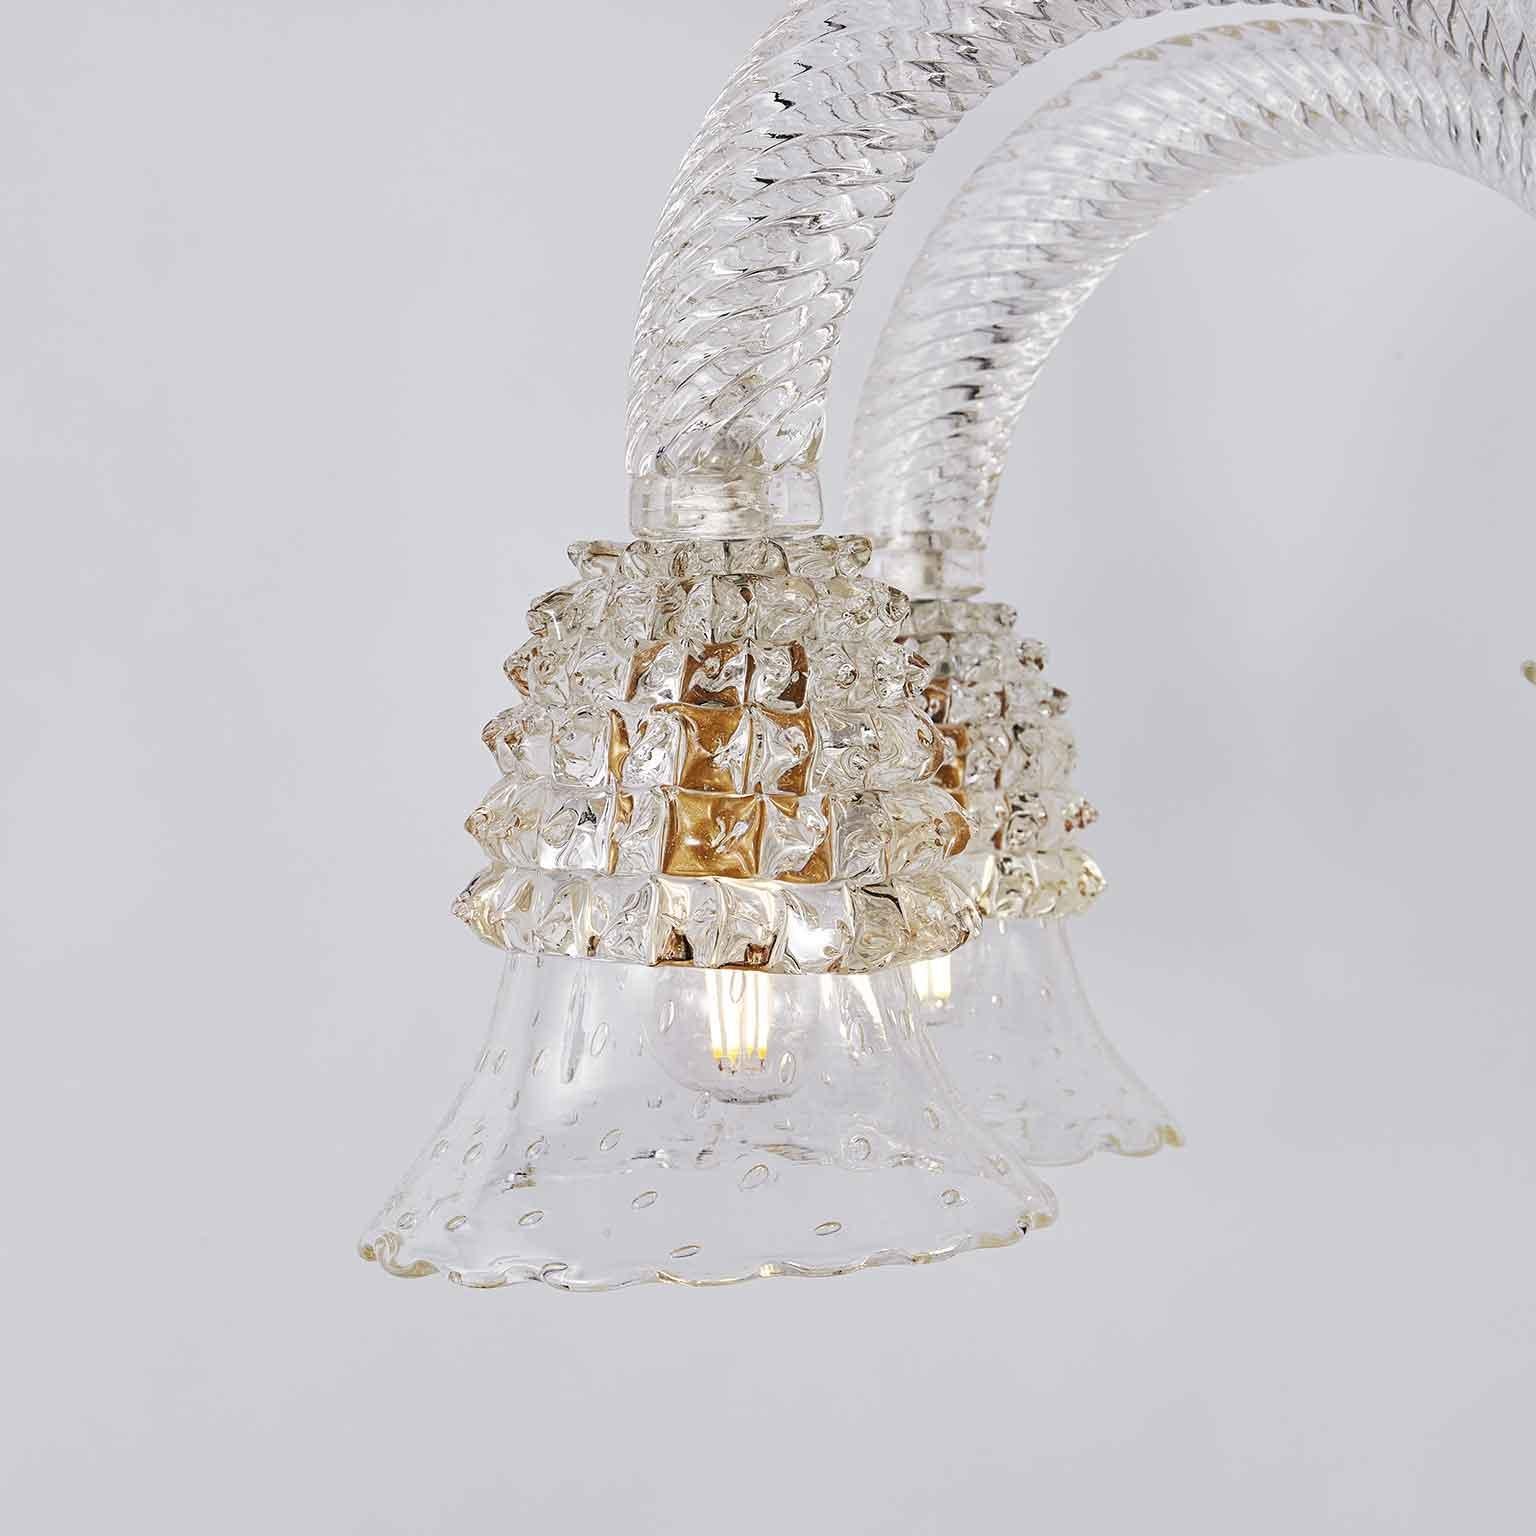 Hand-Crafted 20th Century Venetian Barovier Rostrato Glass Chandelier from Murano